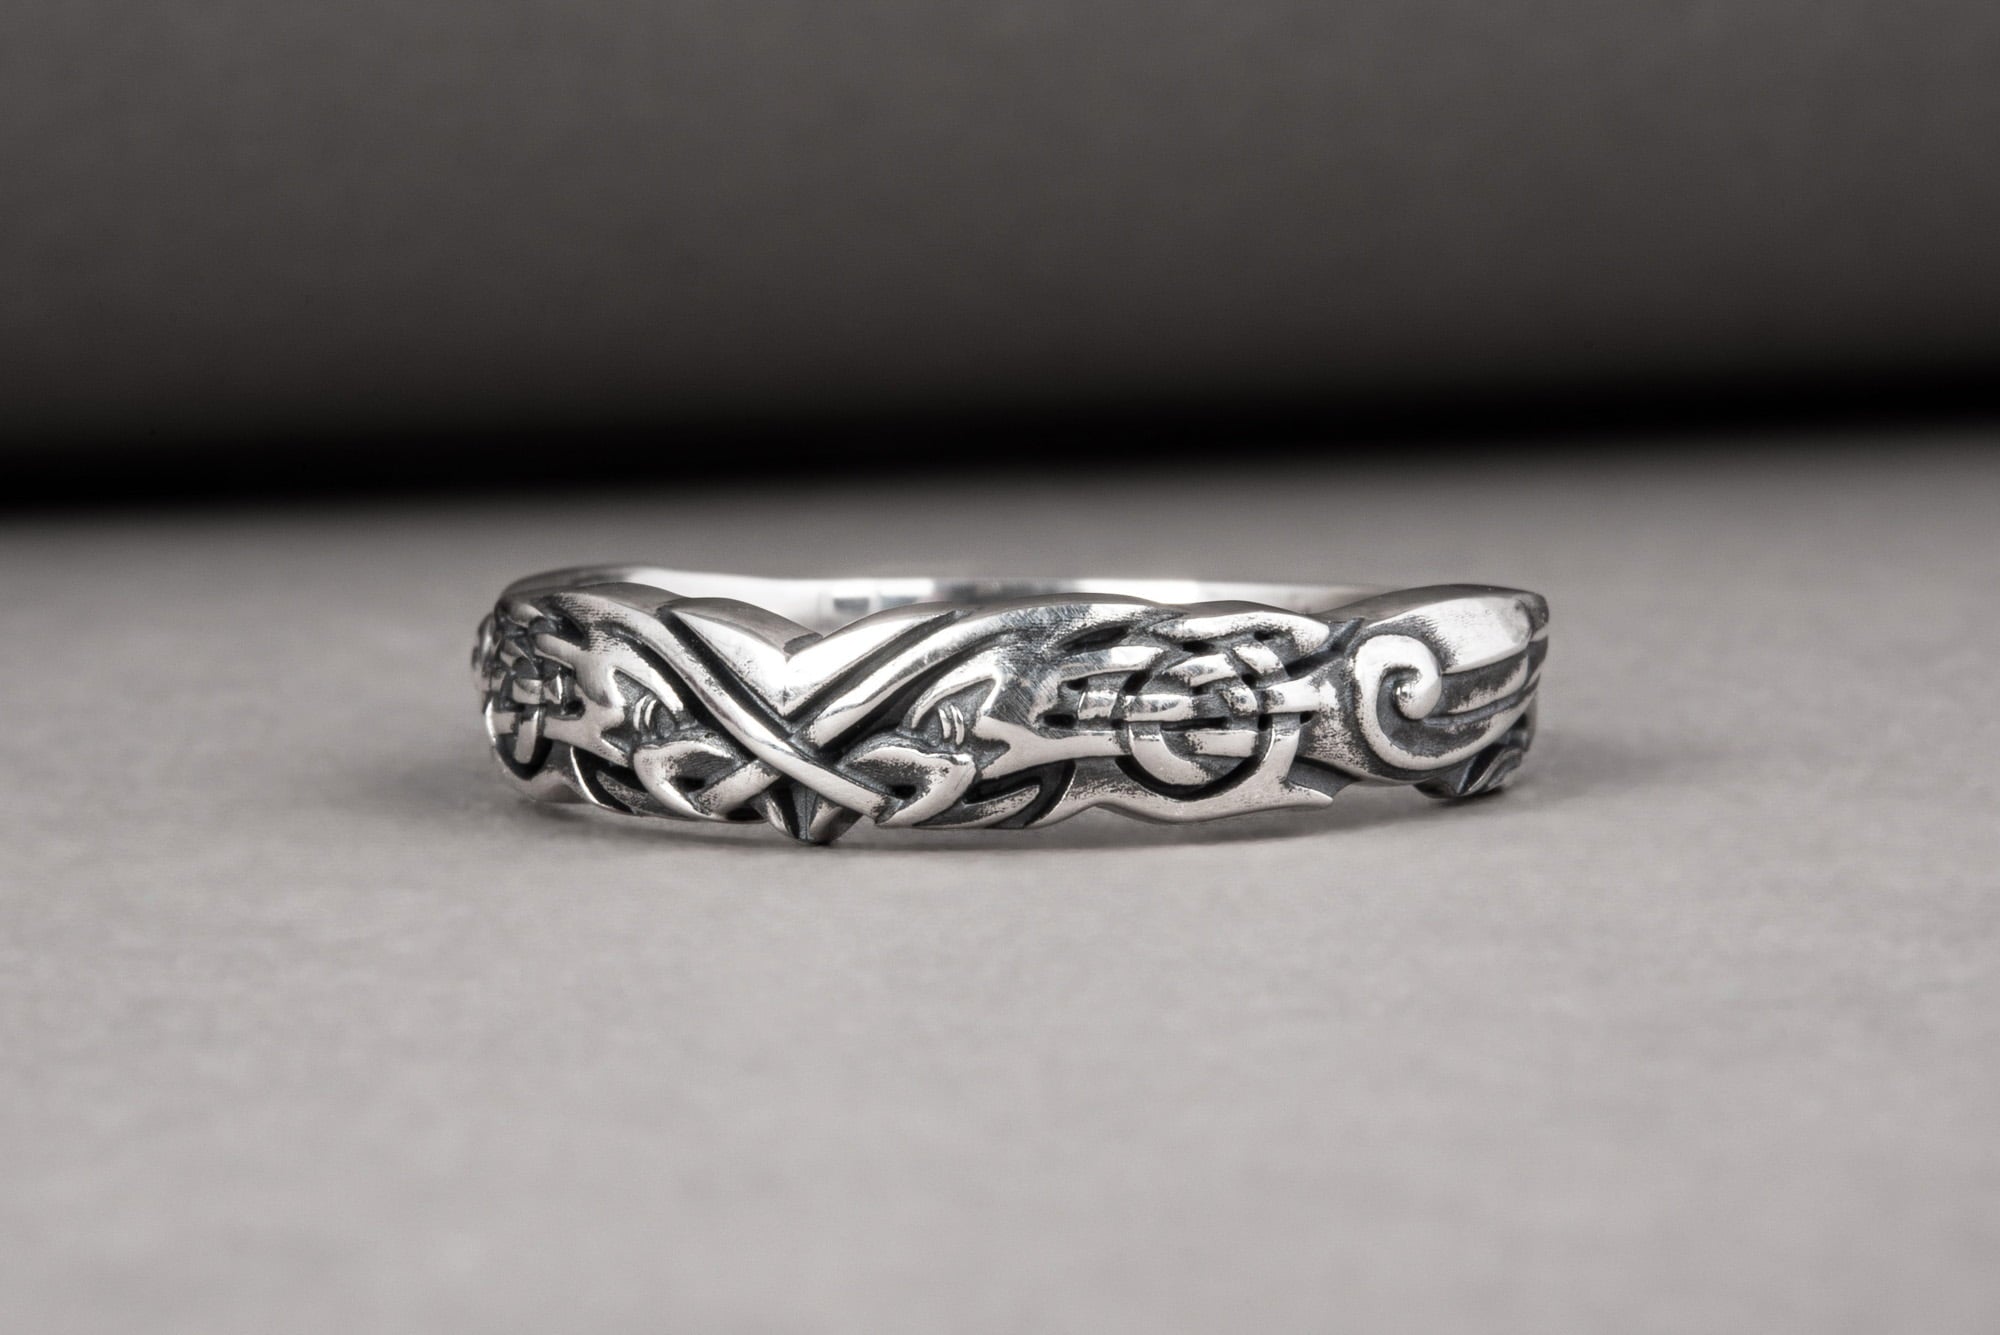 Handmade 925 silver Viking ring with ravens and brutal ancient ornament, unique jewelry - vikingworkshop